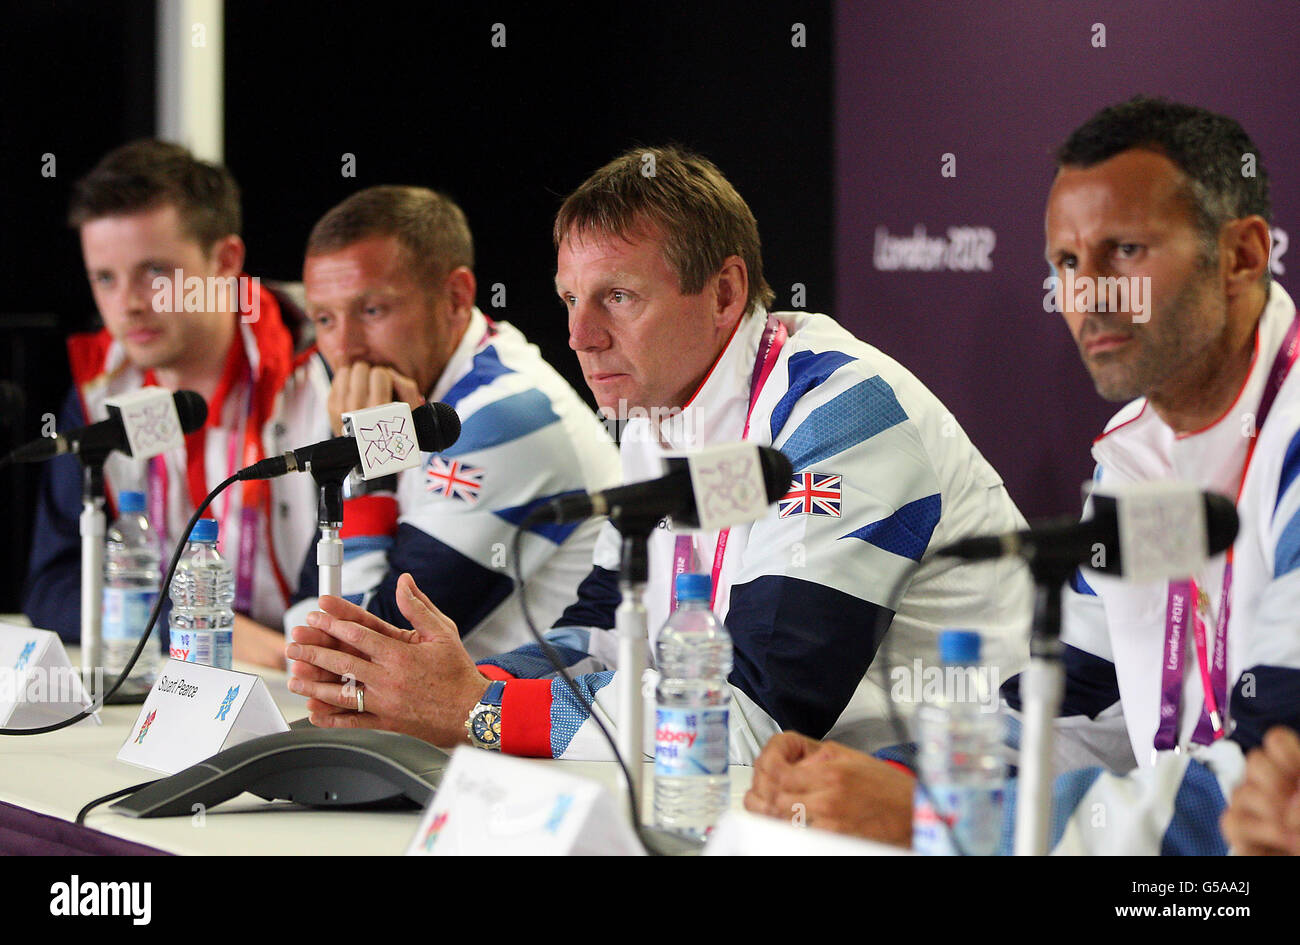 Olympics - London 2012 Olympics - Great Britain Men's Football Press Conference - Olympic Park. Great Britain coach Stuart Pearce during a press conference at the Olympic Park, London. Stock Photo